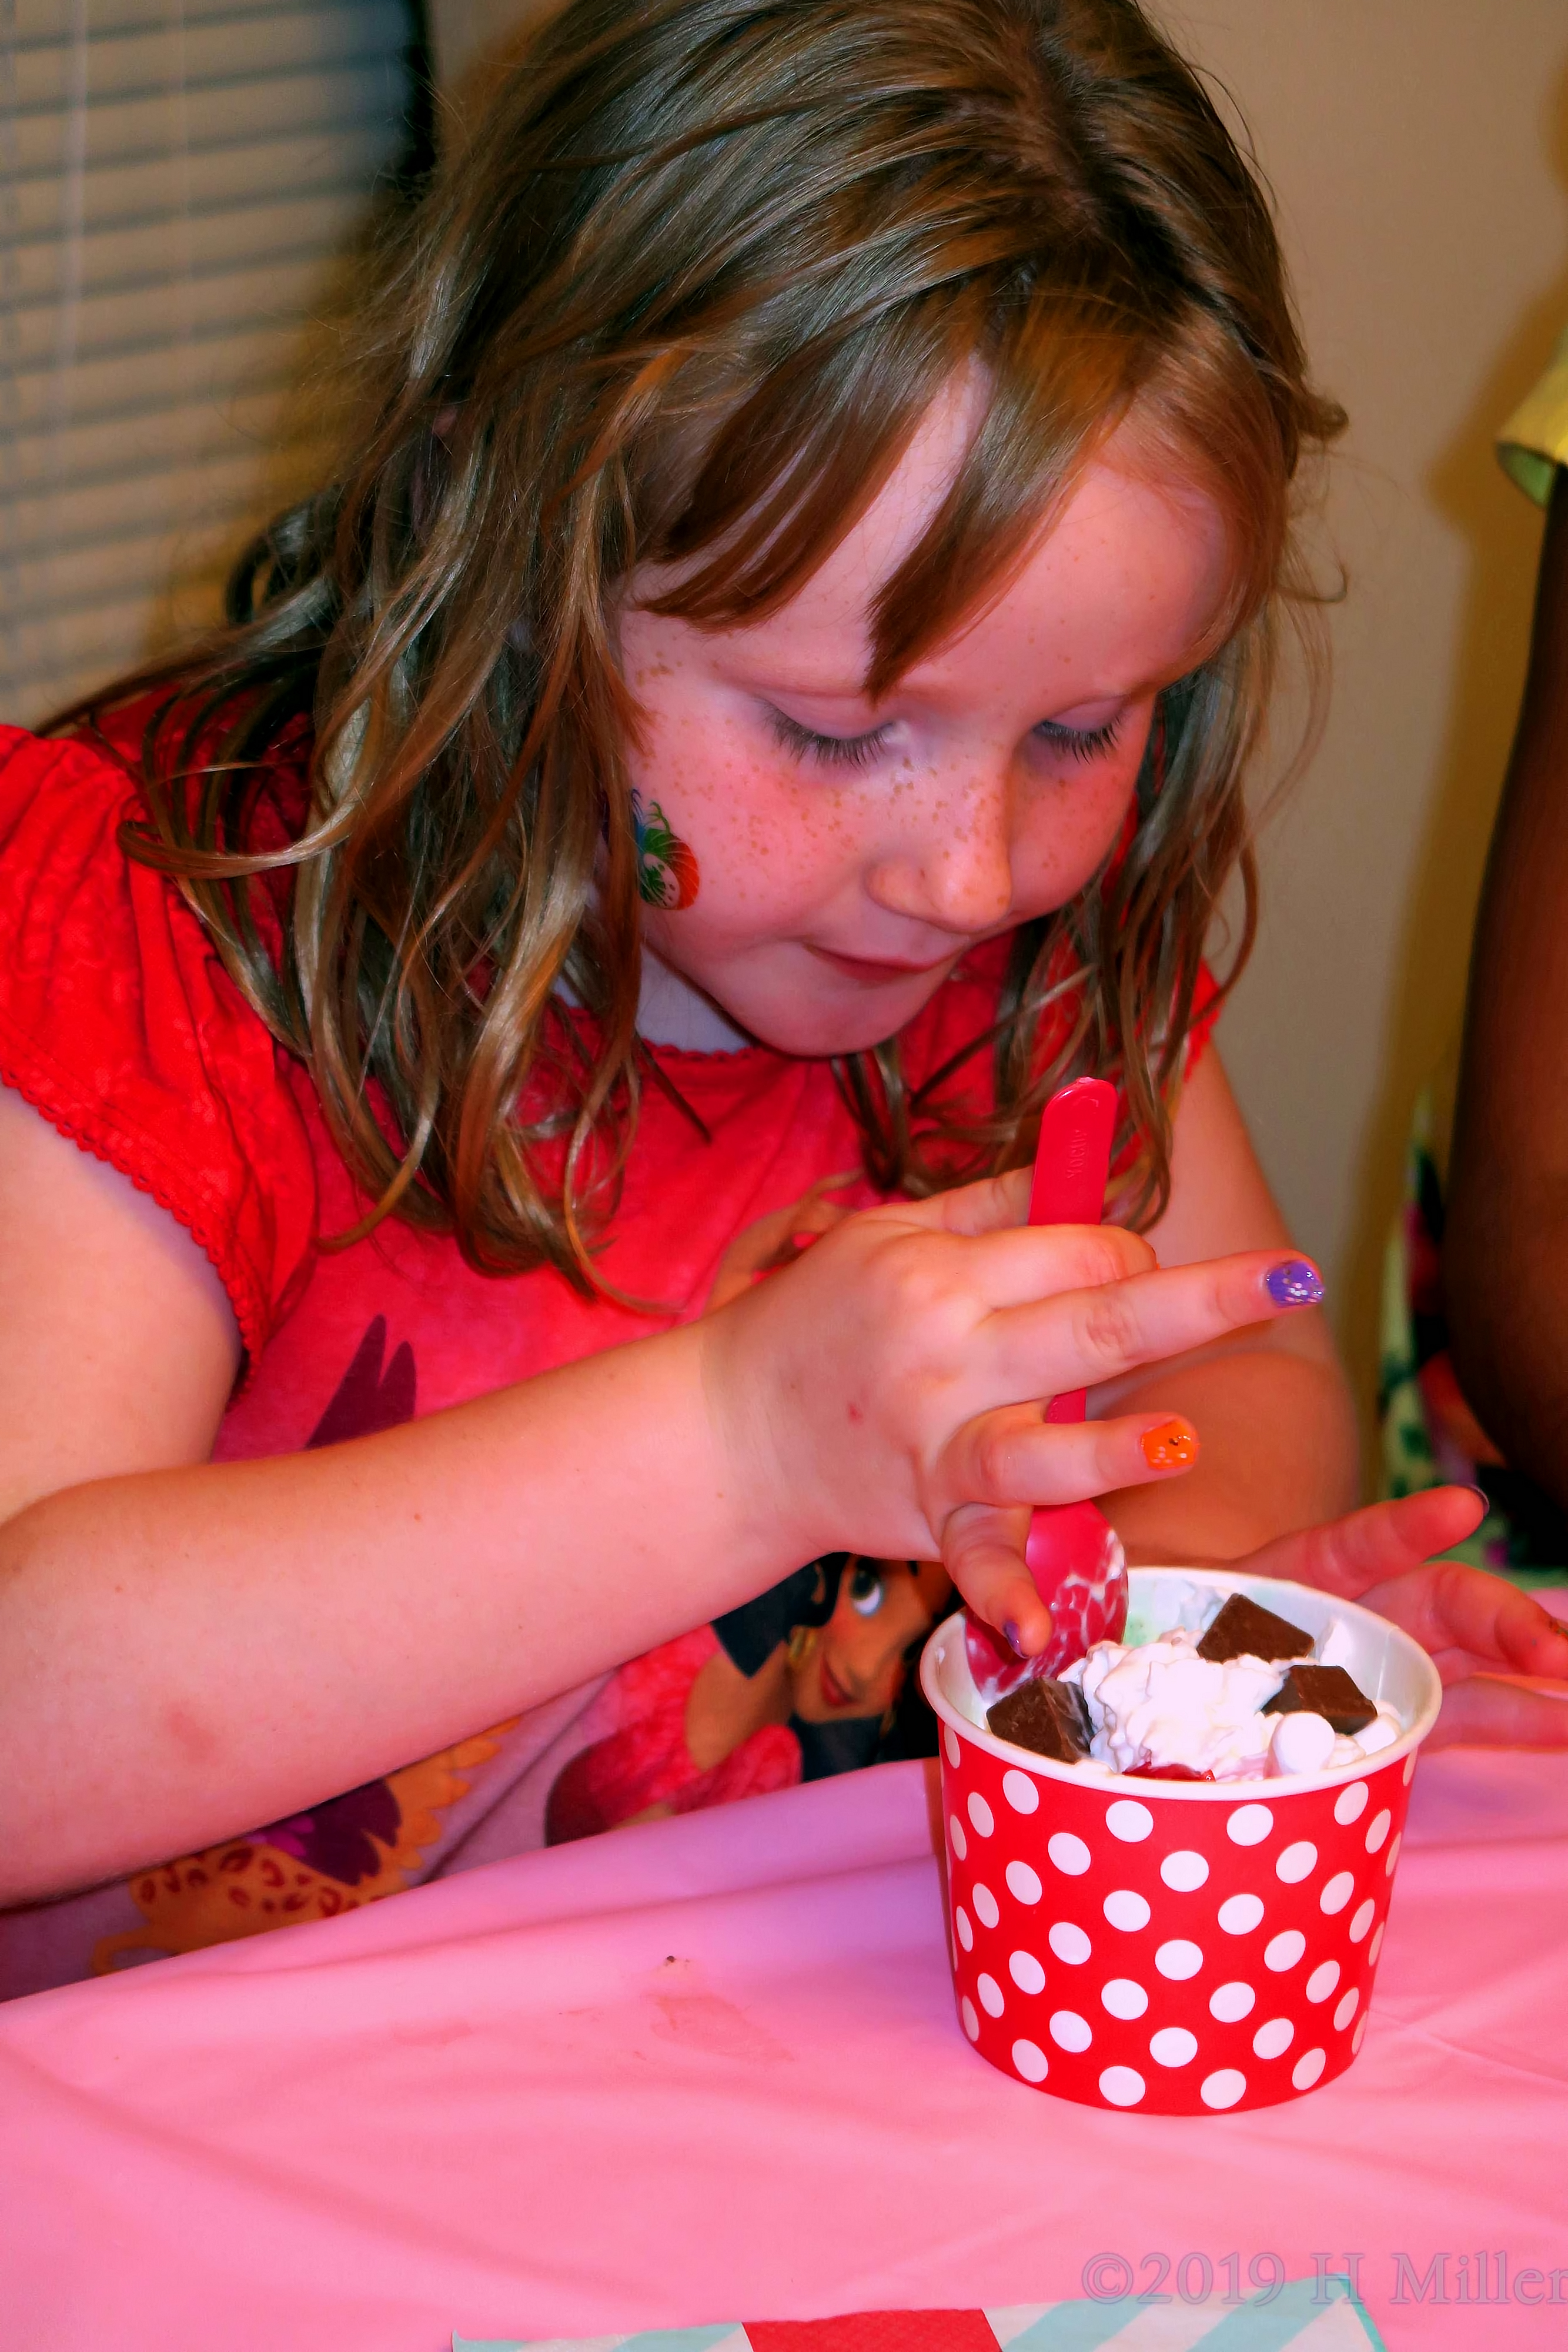 Scrumptious Scoops! Birthday Girl Digs In To Ice Cream! 4